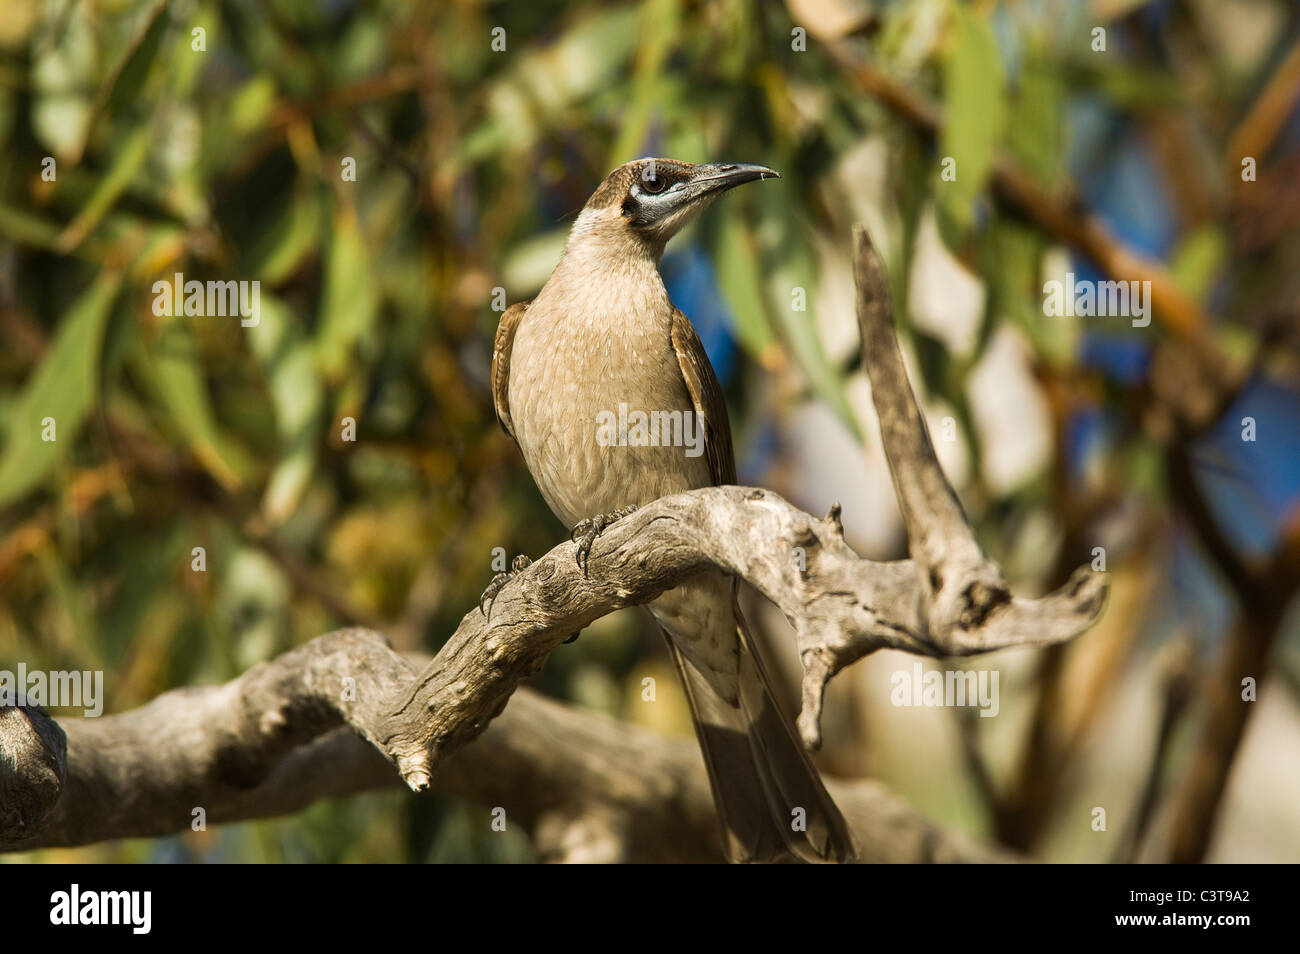 Little Friarbird, Ourimpere Waterhole, Currawinya National Park, Queensland, Australia Stock Photo